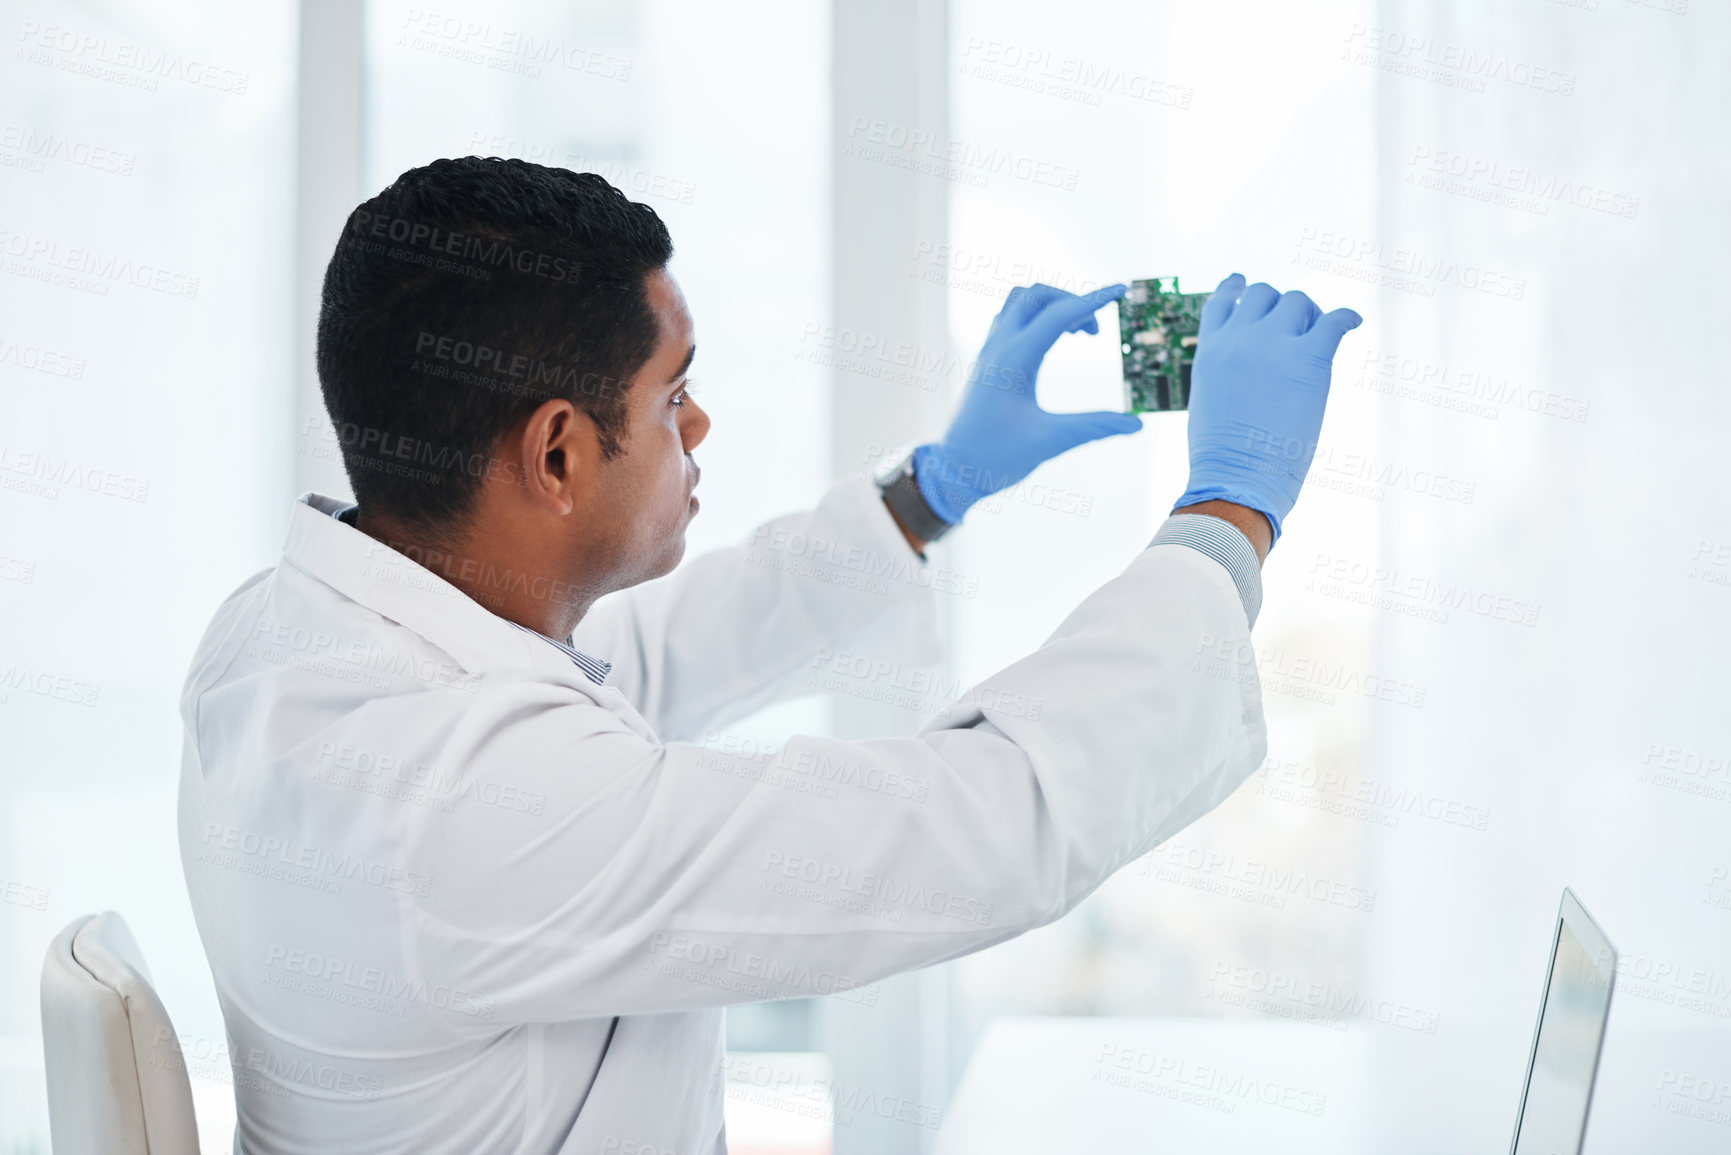 Buy stock photo Shot of a young man repairing computer hardware in a laboratory